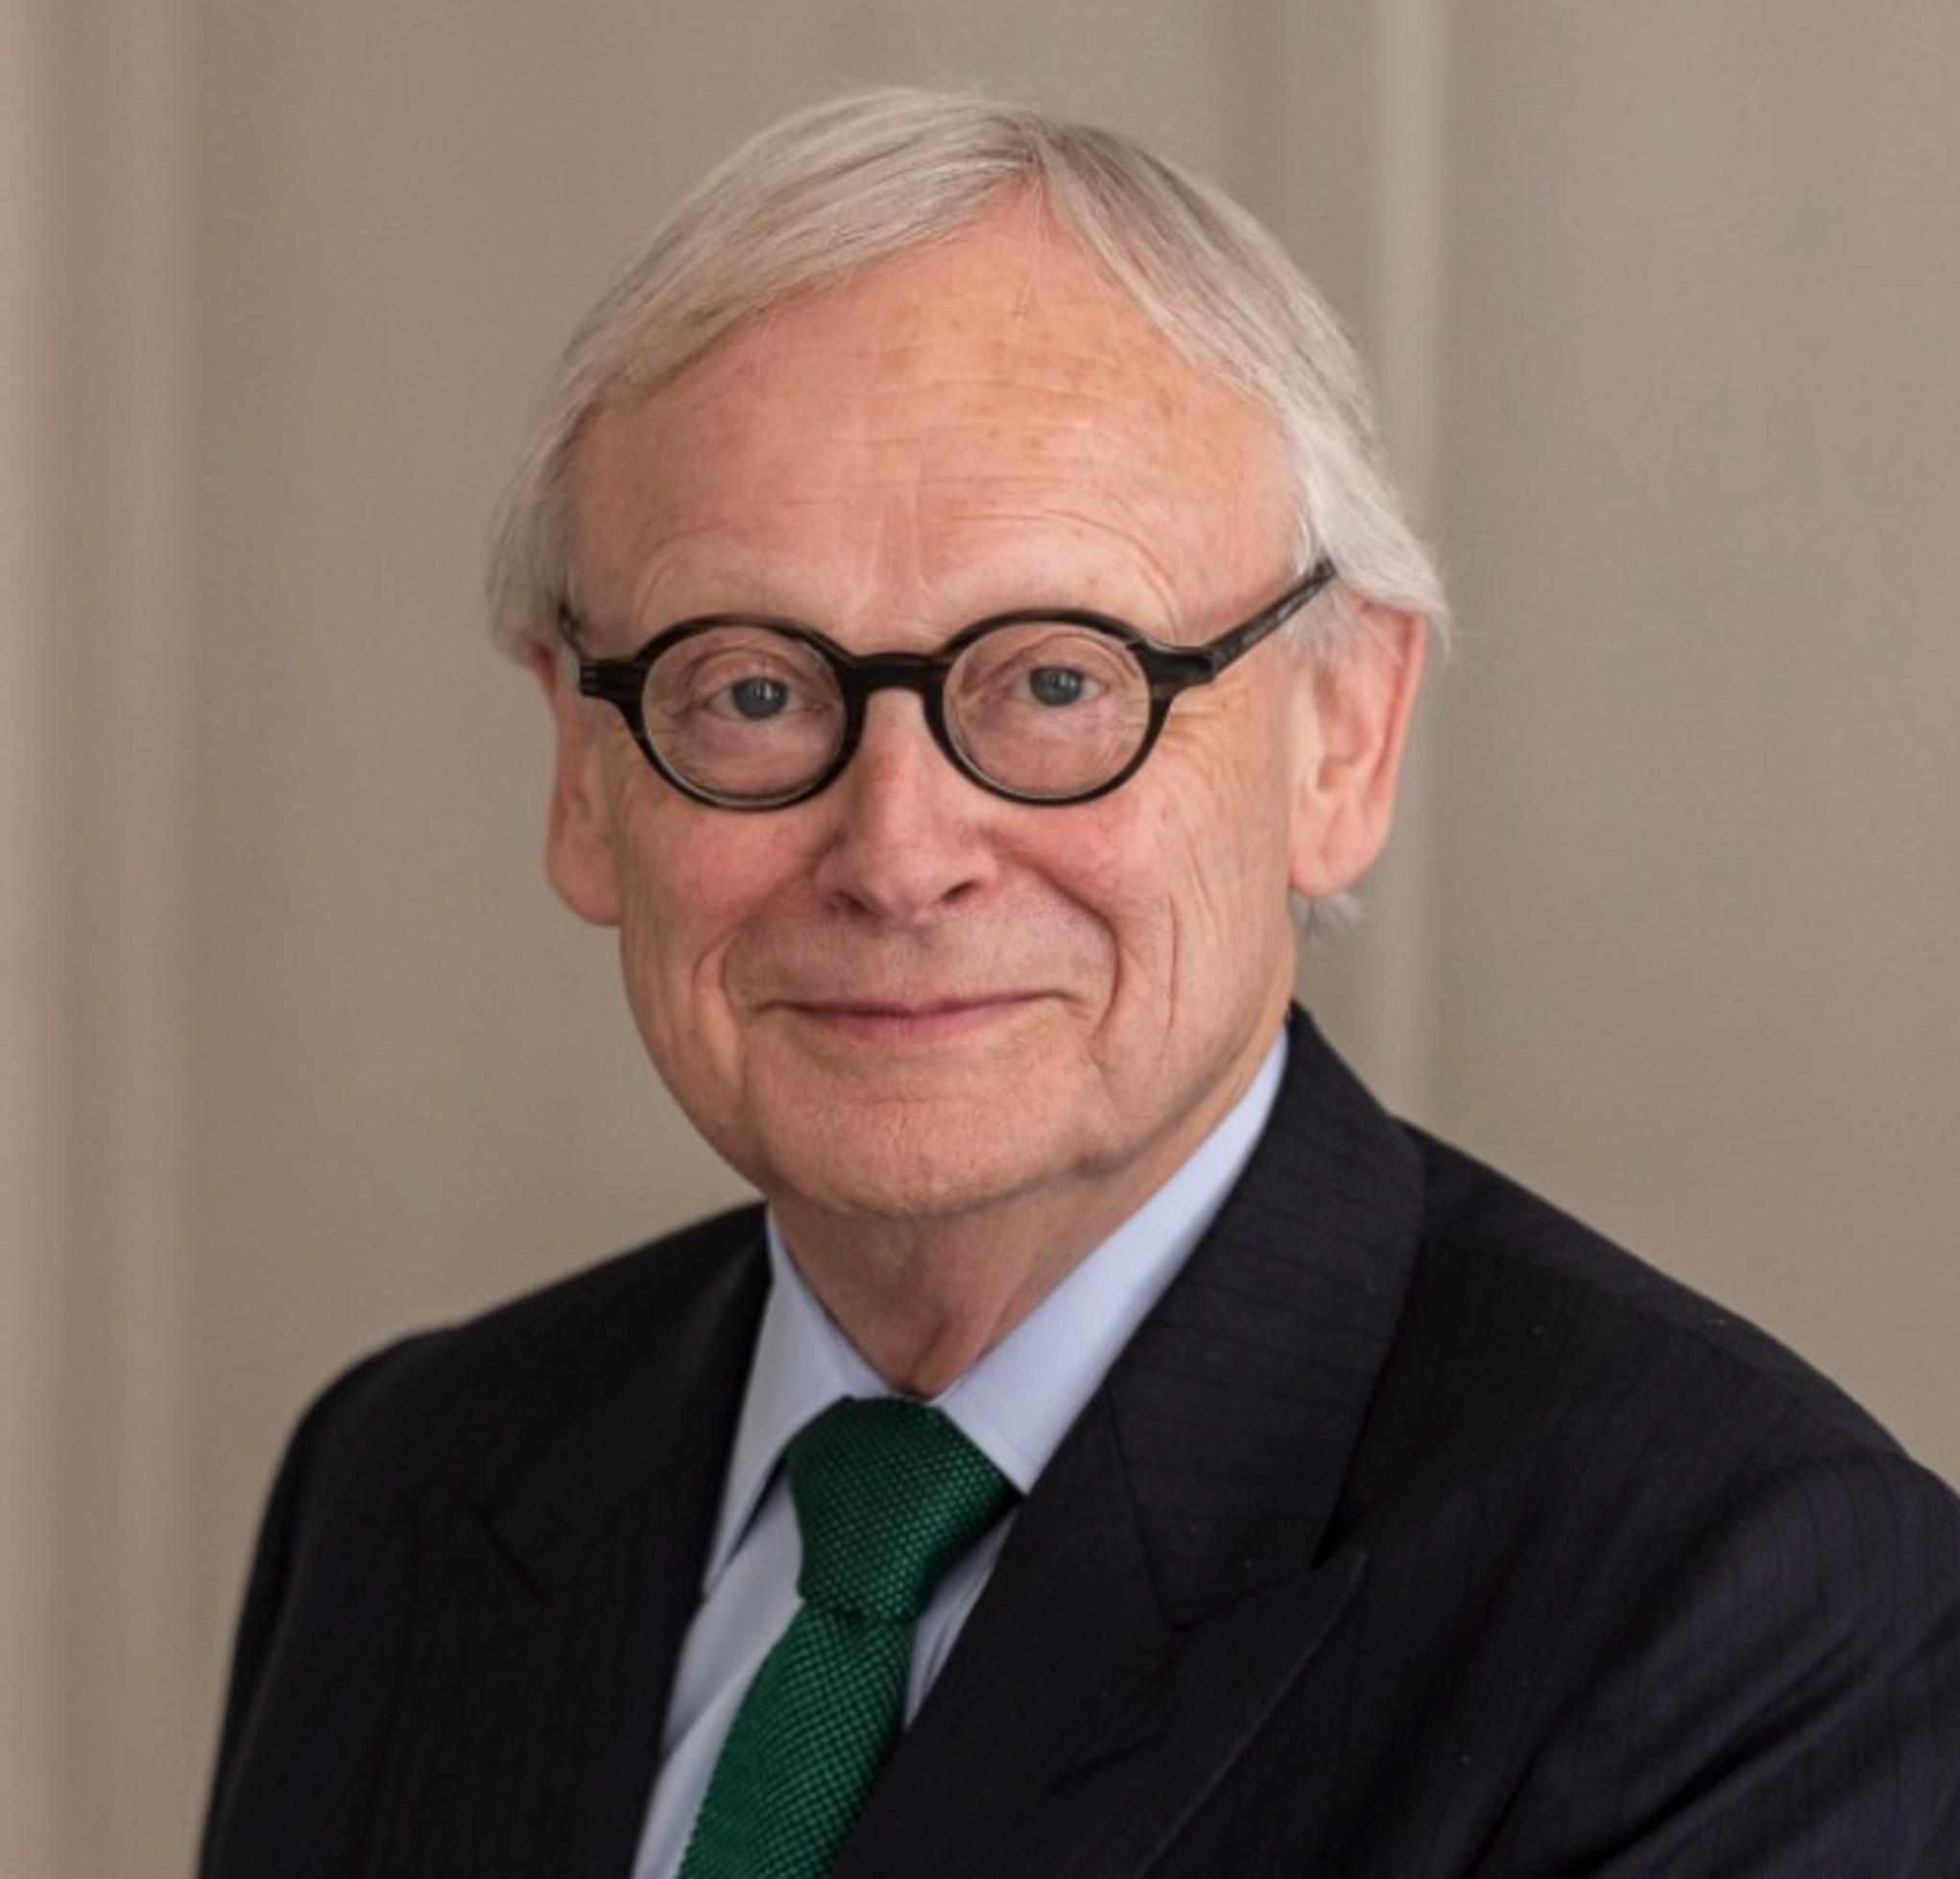 Lord Deben: Our confidence in the achievement of the UK’s 2030 target and the Fifth and Sixth Carbon Budgets has markedly declined from last year